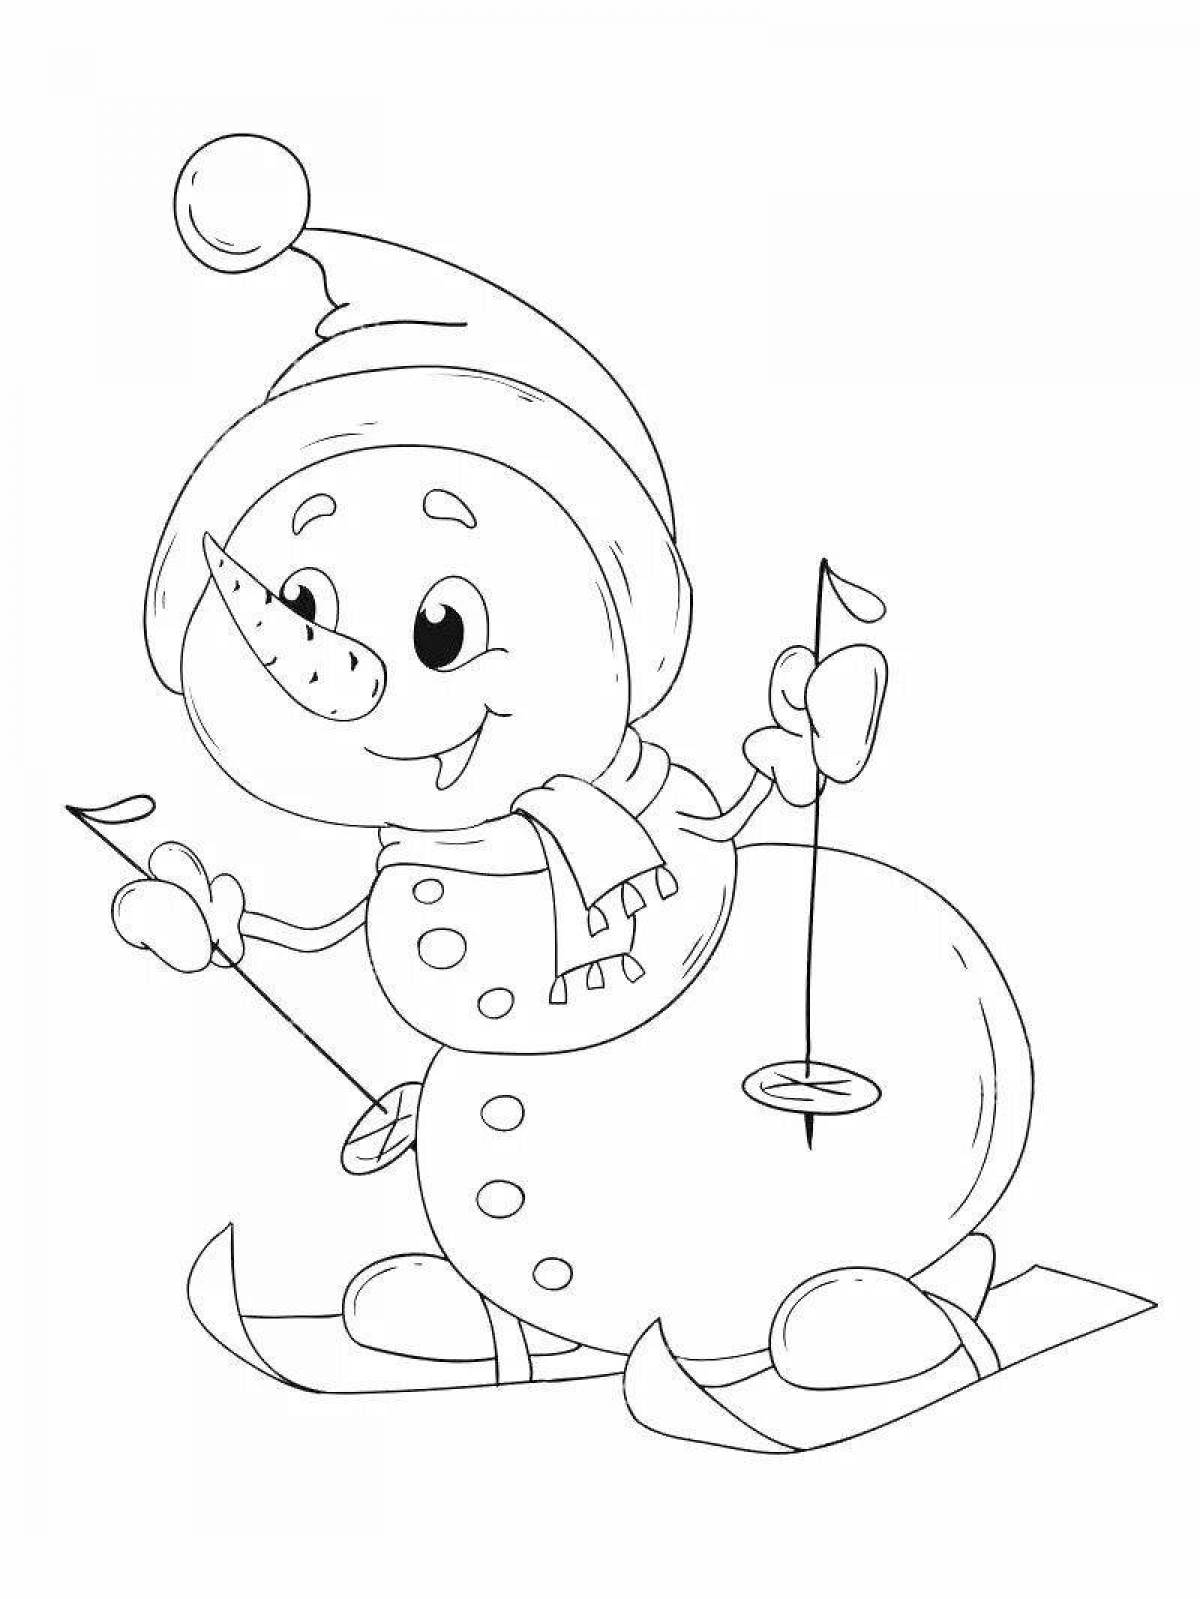 Funny snowman coloring book for kids